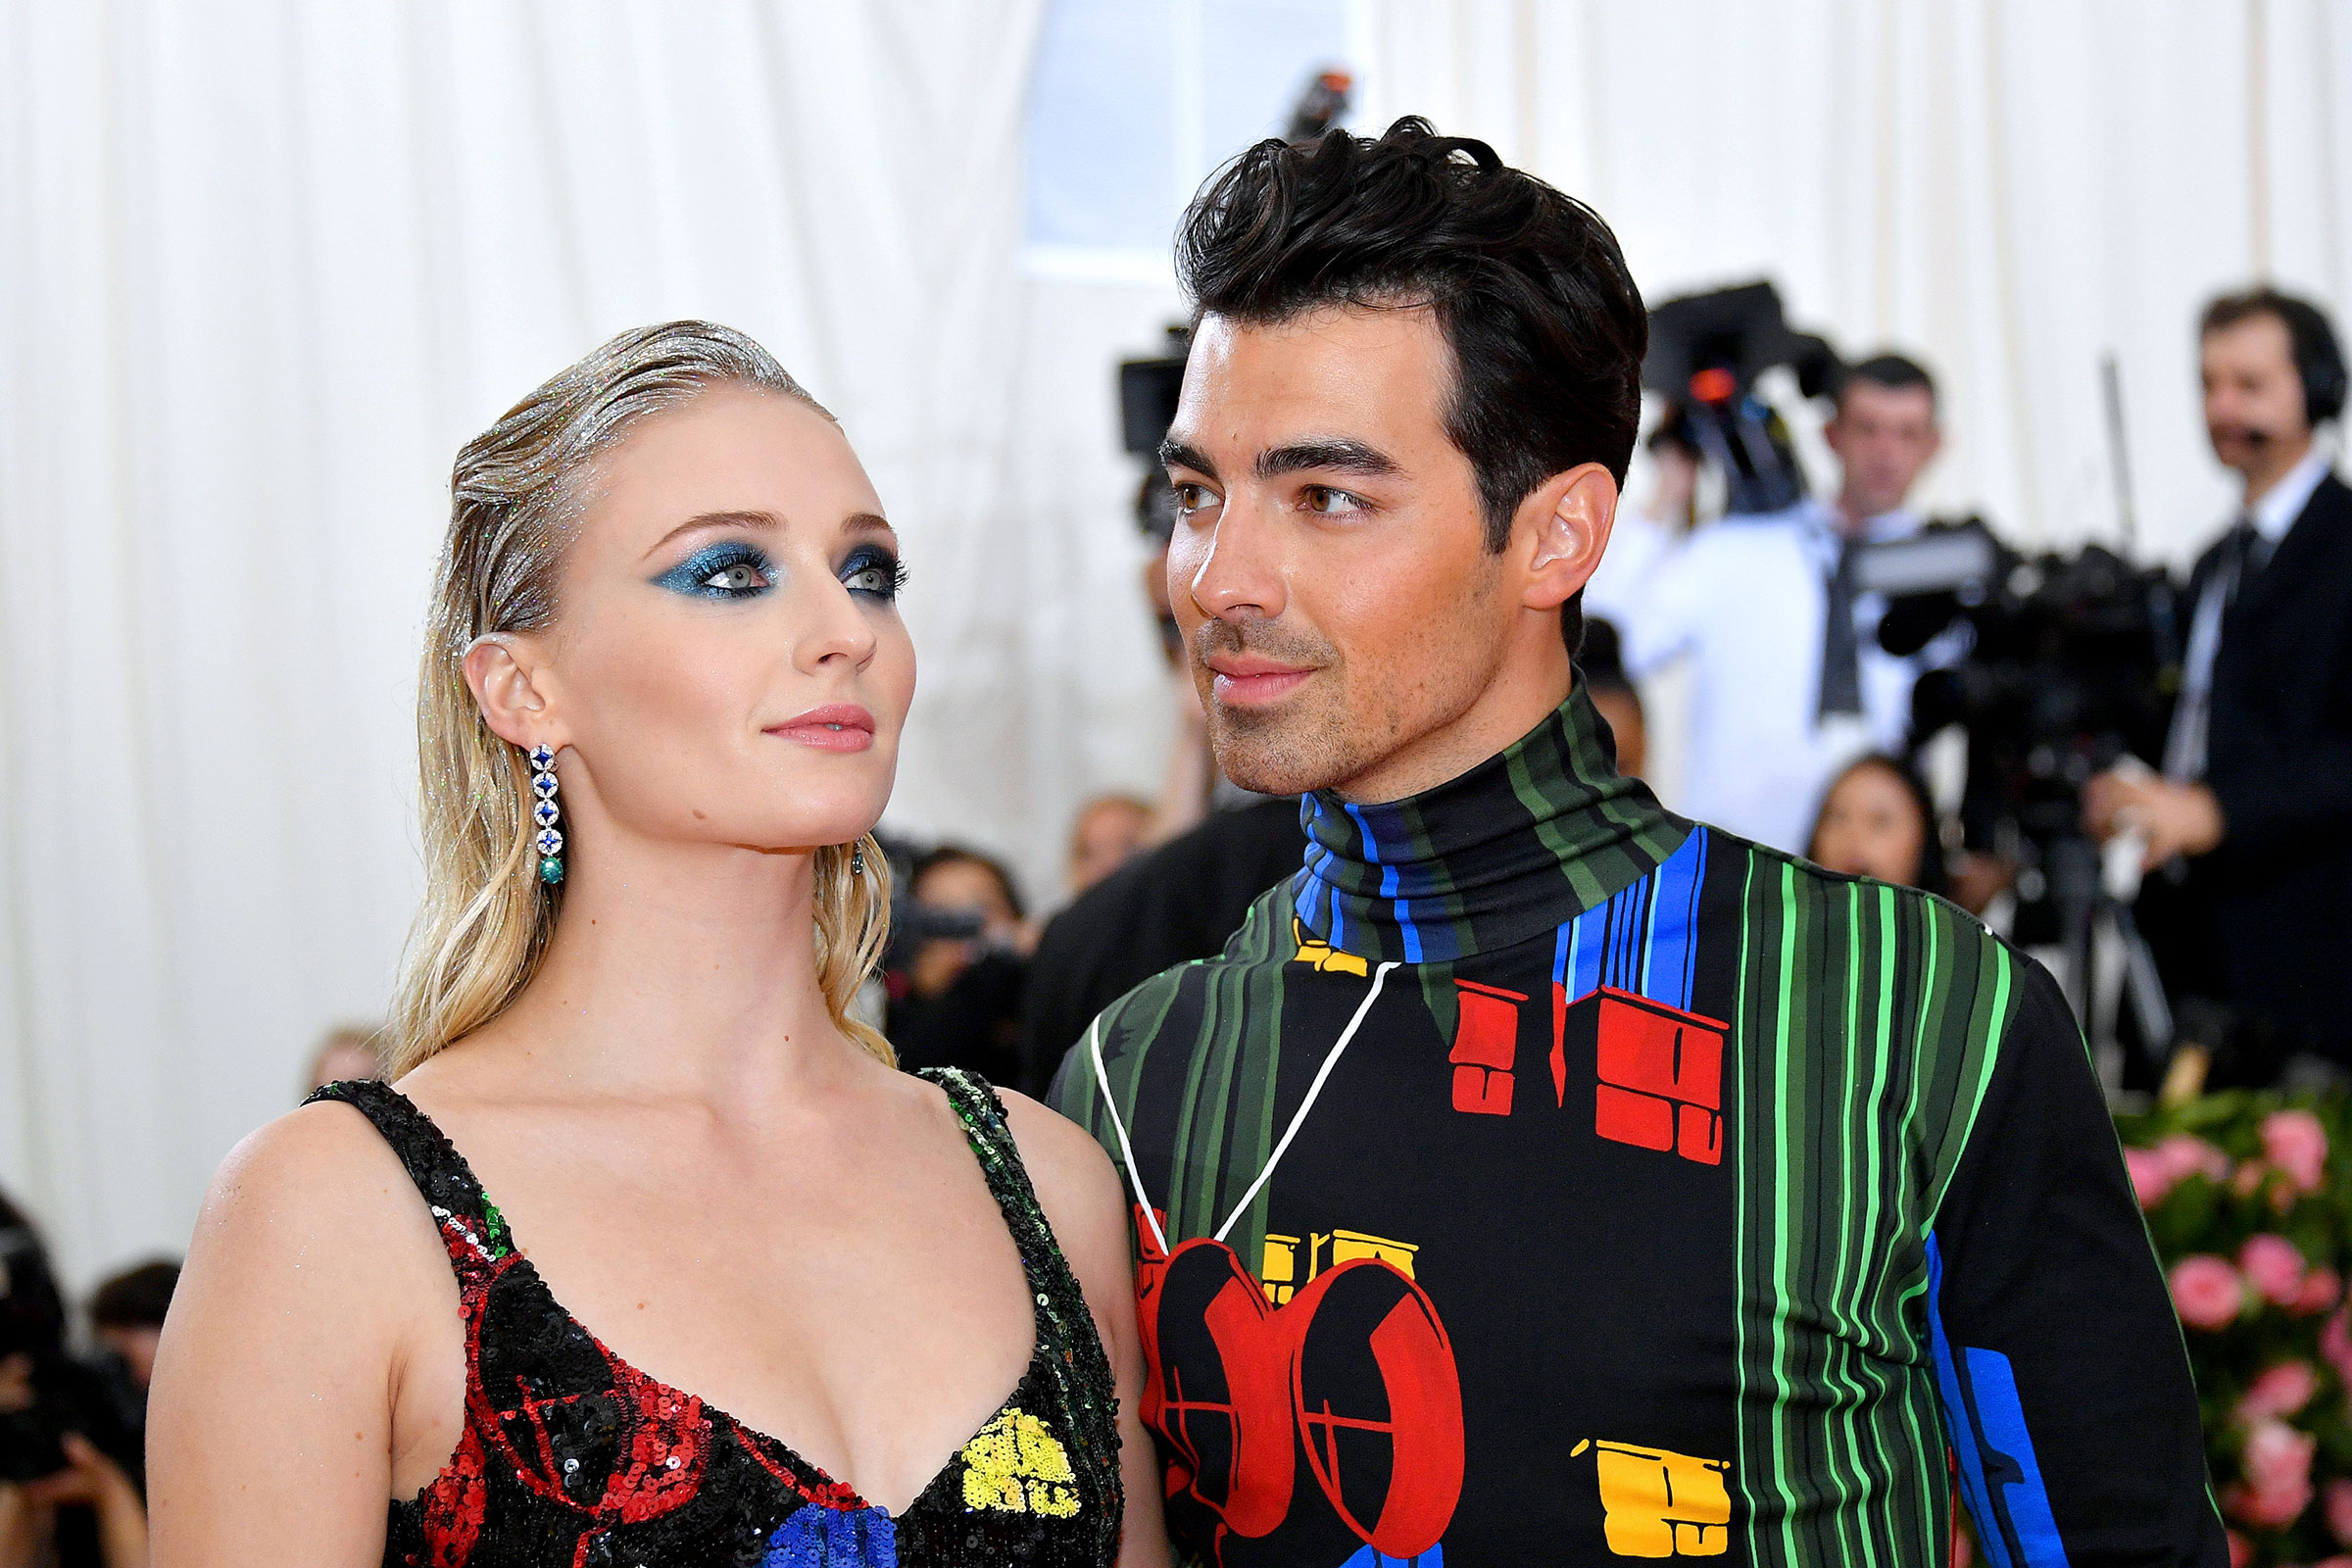 Joe Jonas and Sophie Turner attend The 2019 Met Gala Celebrating Camp: Notes on Fashion at Metropolitan Museum of Art on May 06, 2019 in New York City. (Dia Dipasupil—FilmMagic/Getty Images)